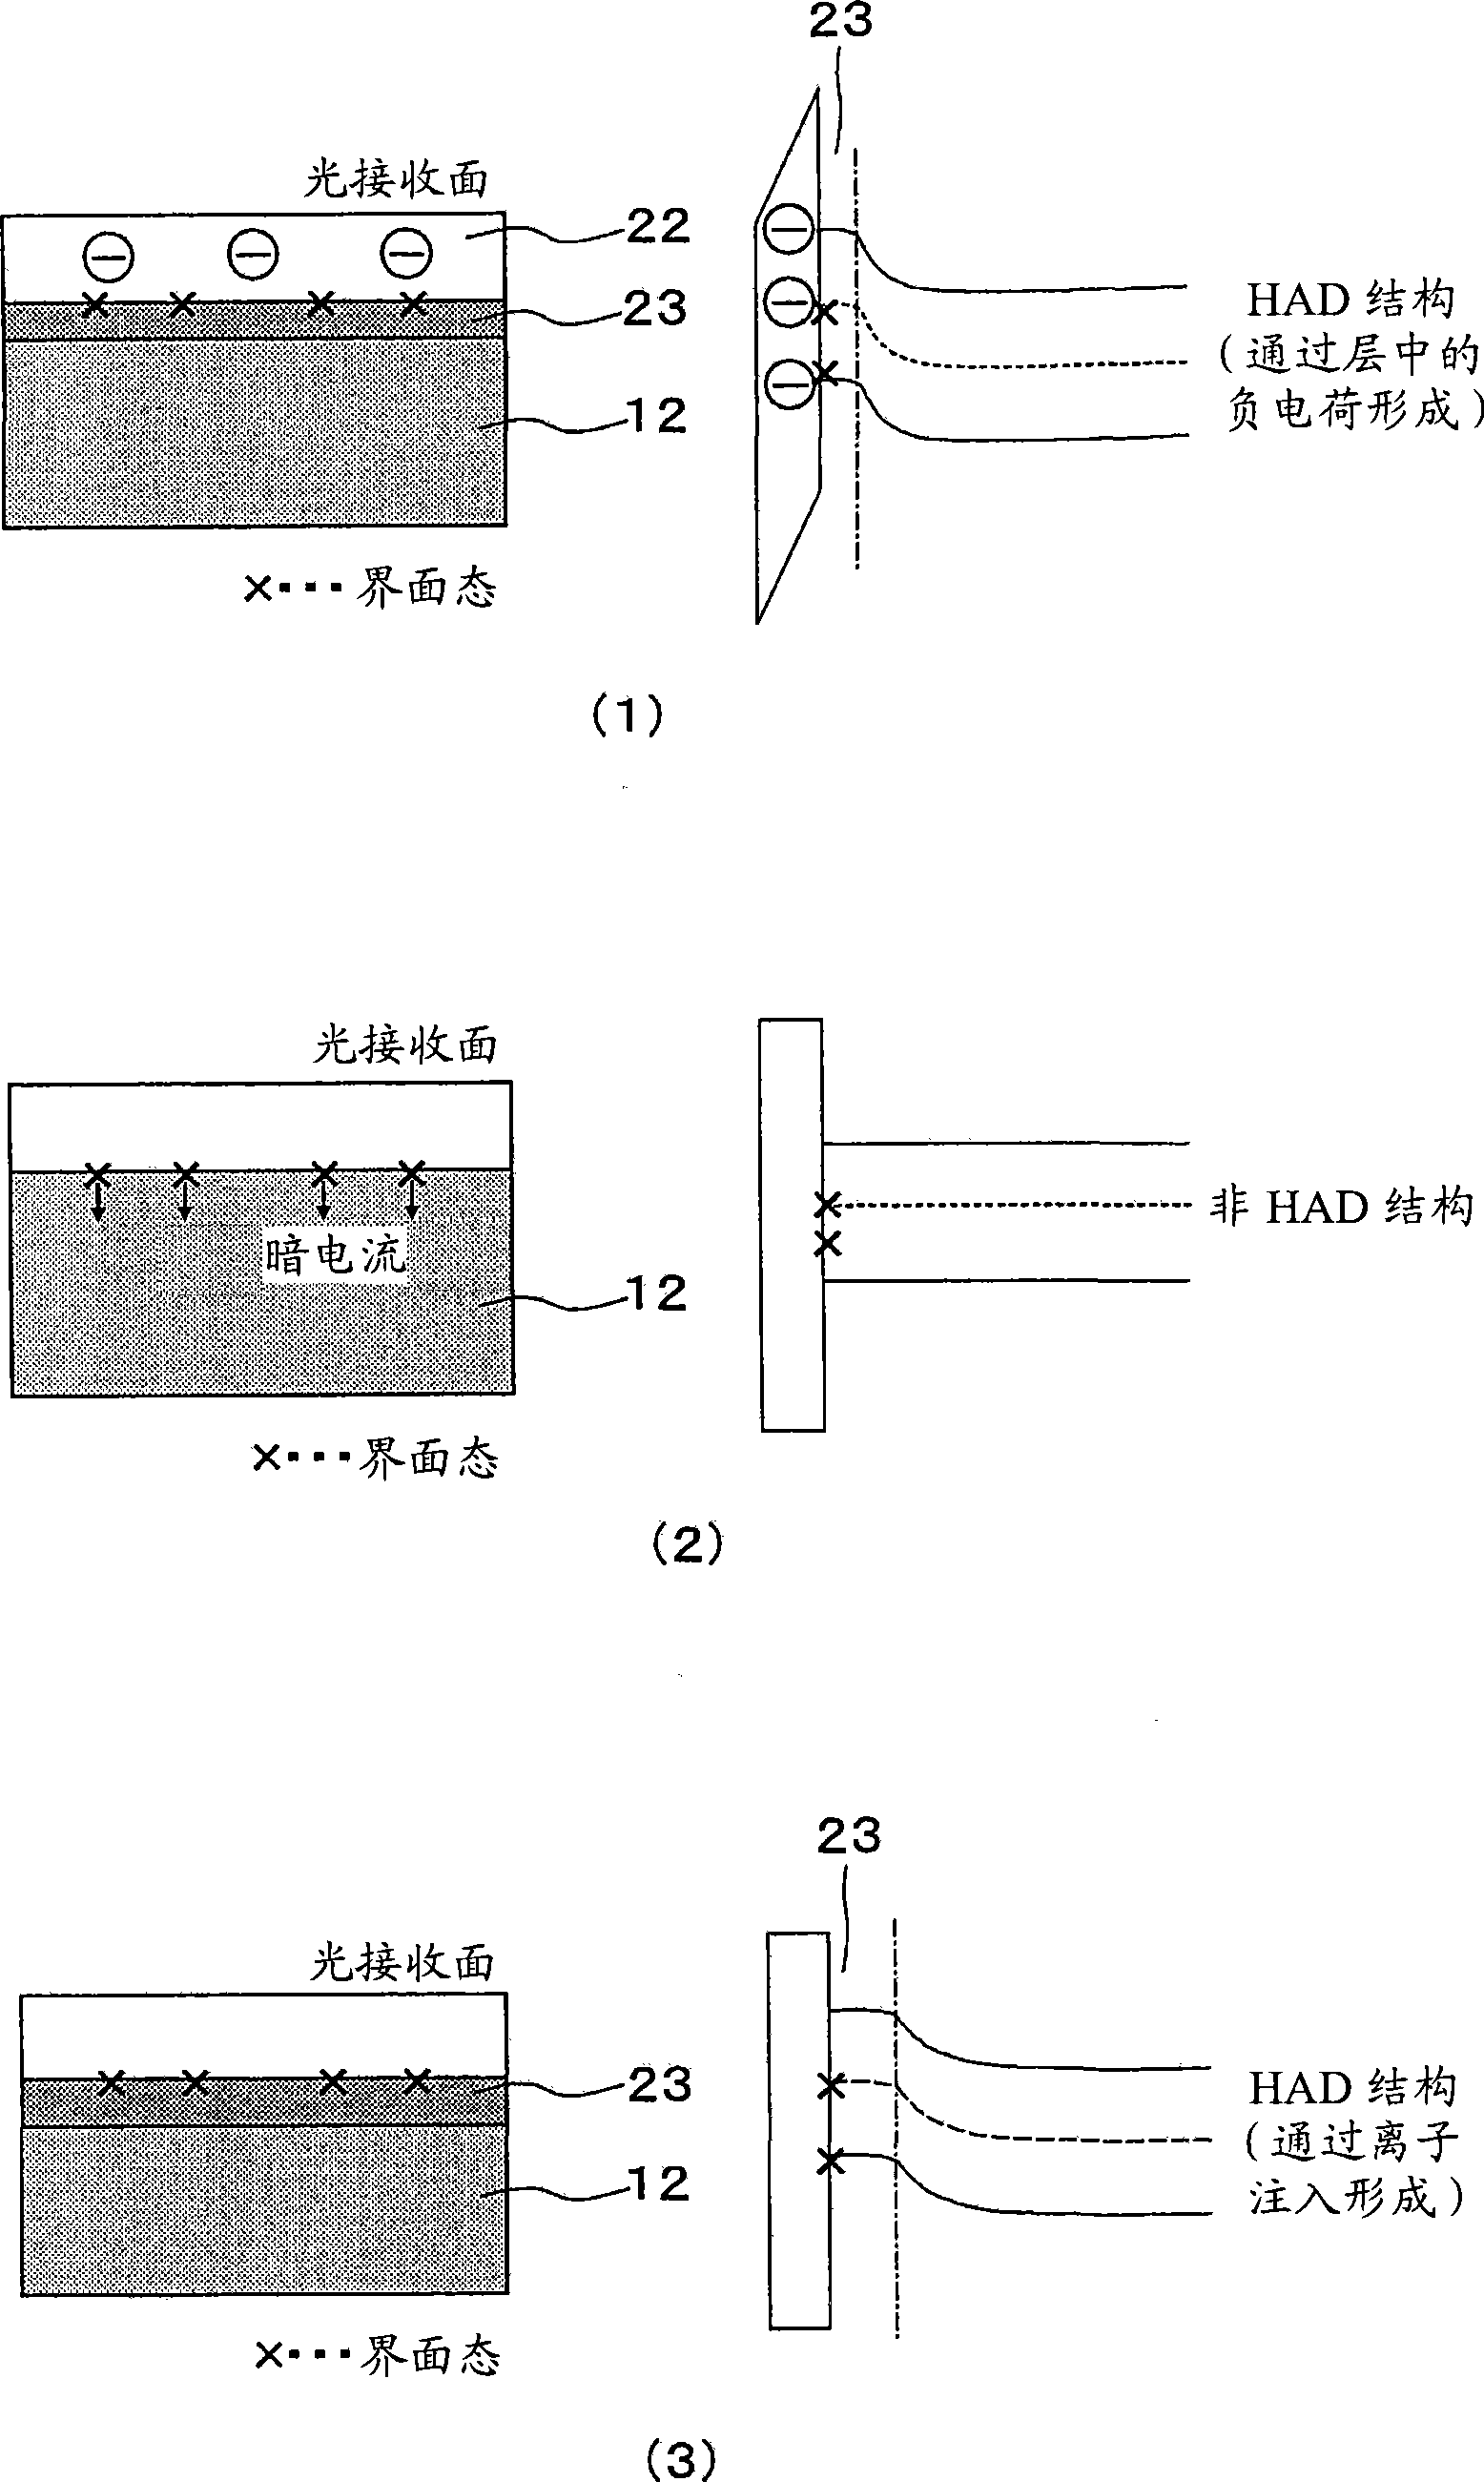 Solid state imaging device, its manufacturing method, and imaging device